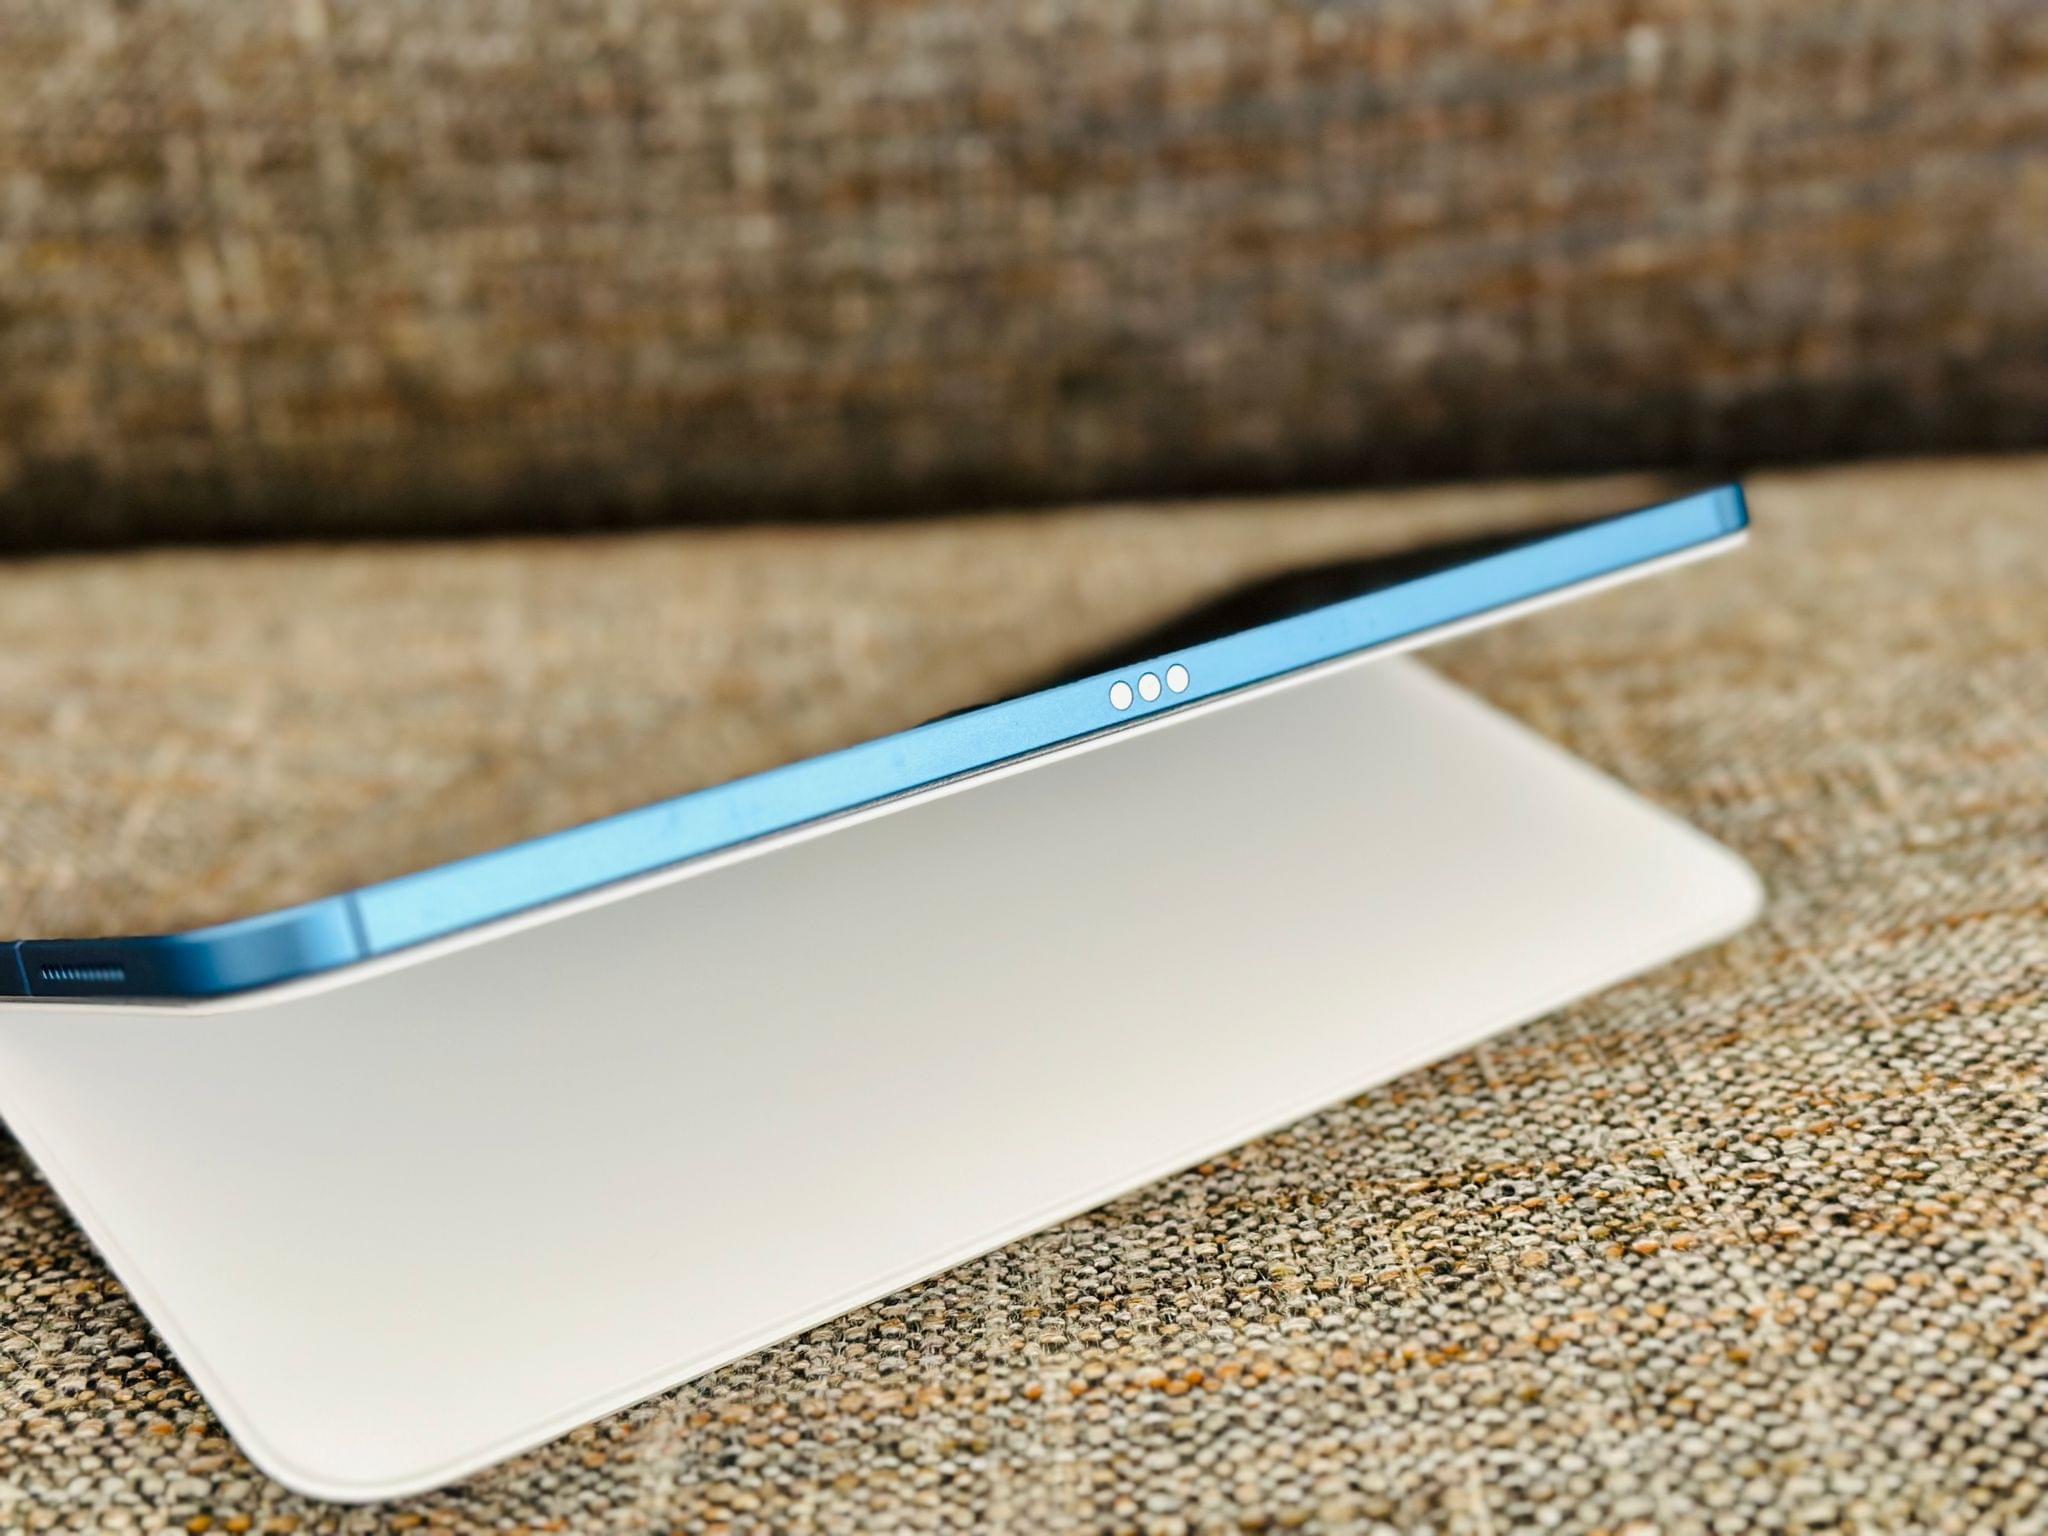 The relocated Smart Connector makes the Magic Keyboard Folio exclusive to this new iPad.